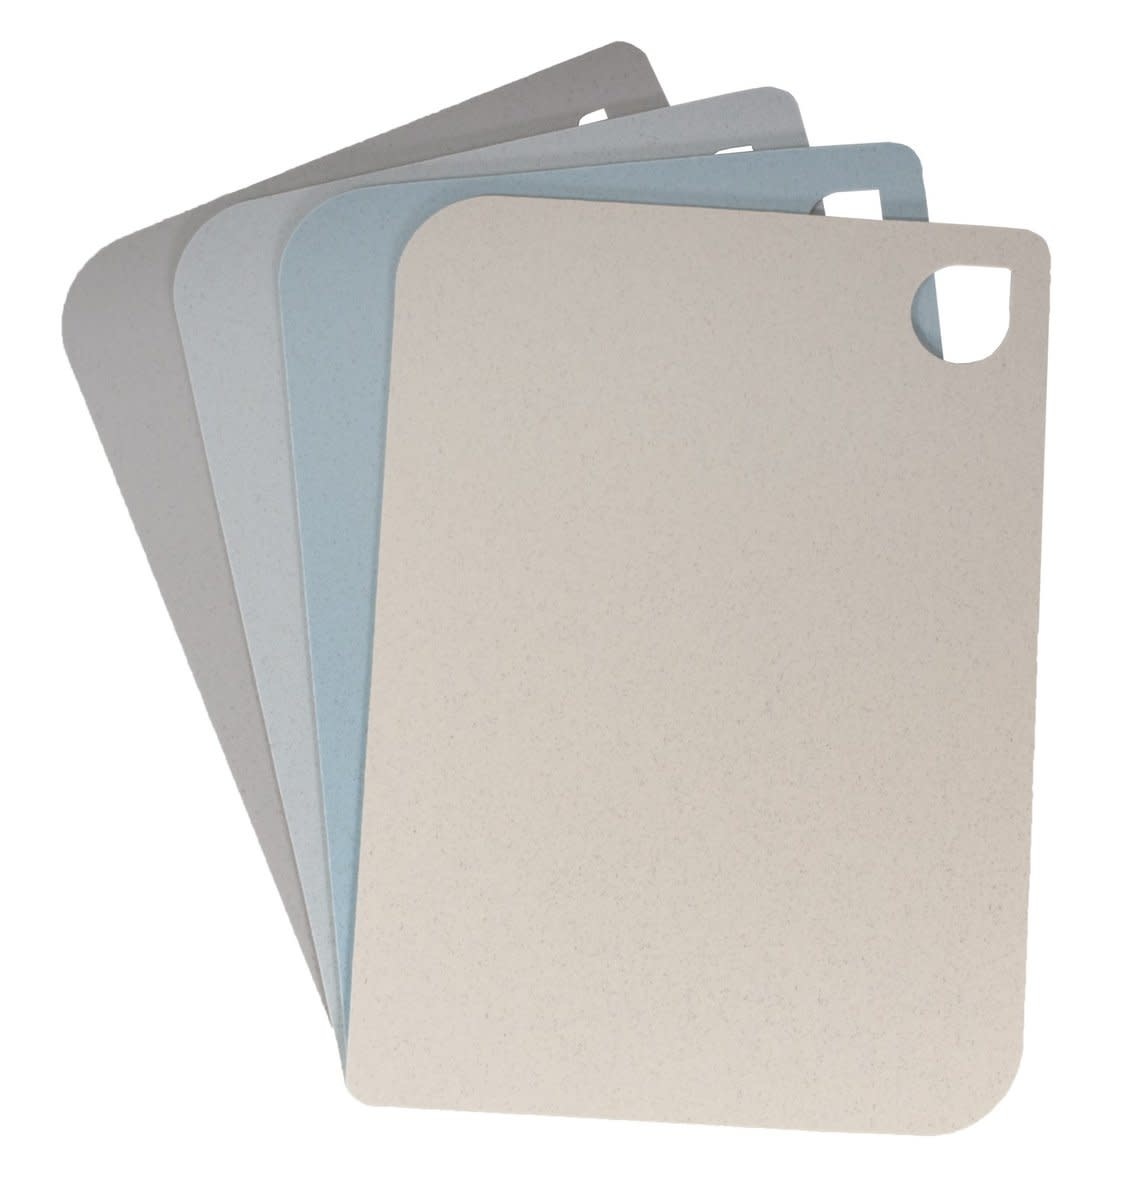 Port-Style Flexible Cutting Mats - Pastel, Set of 4 - Spoons N Spice